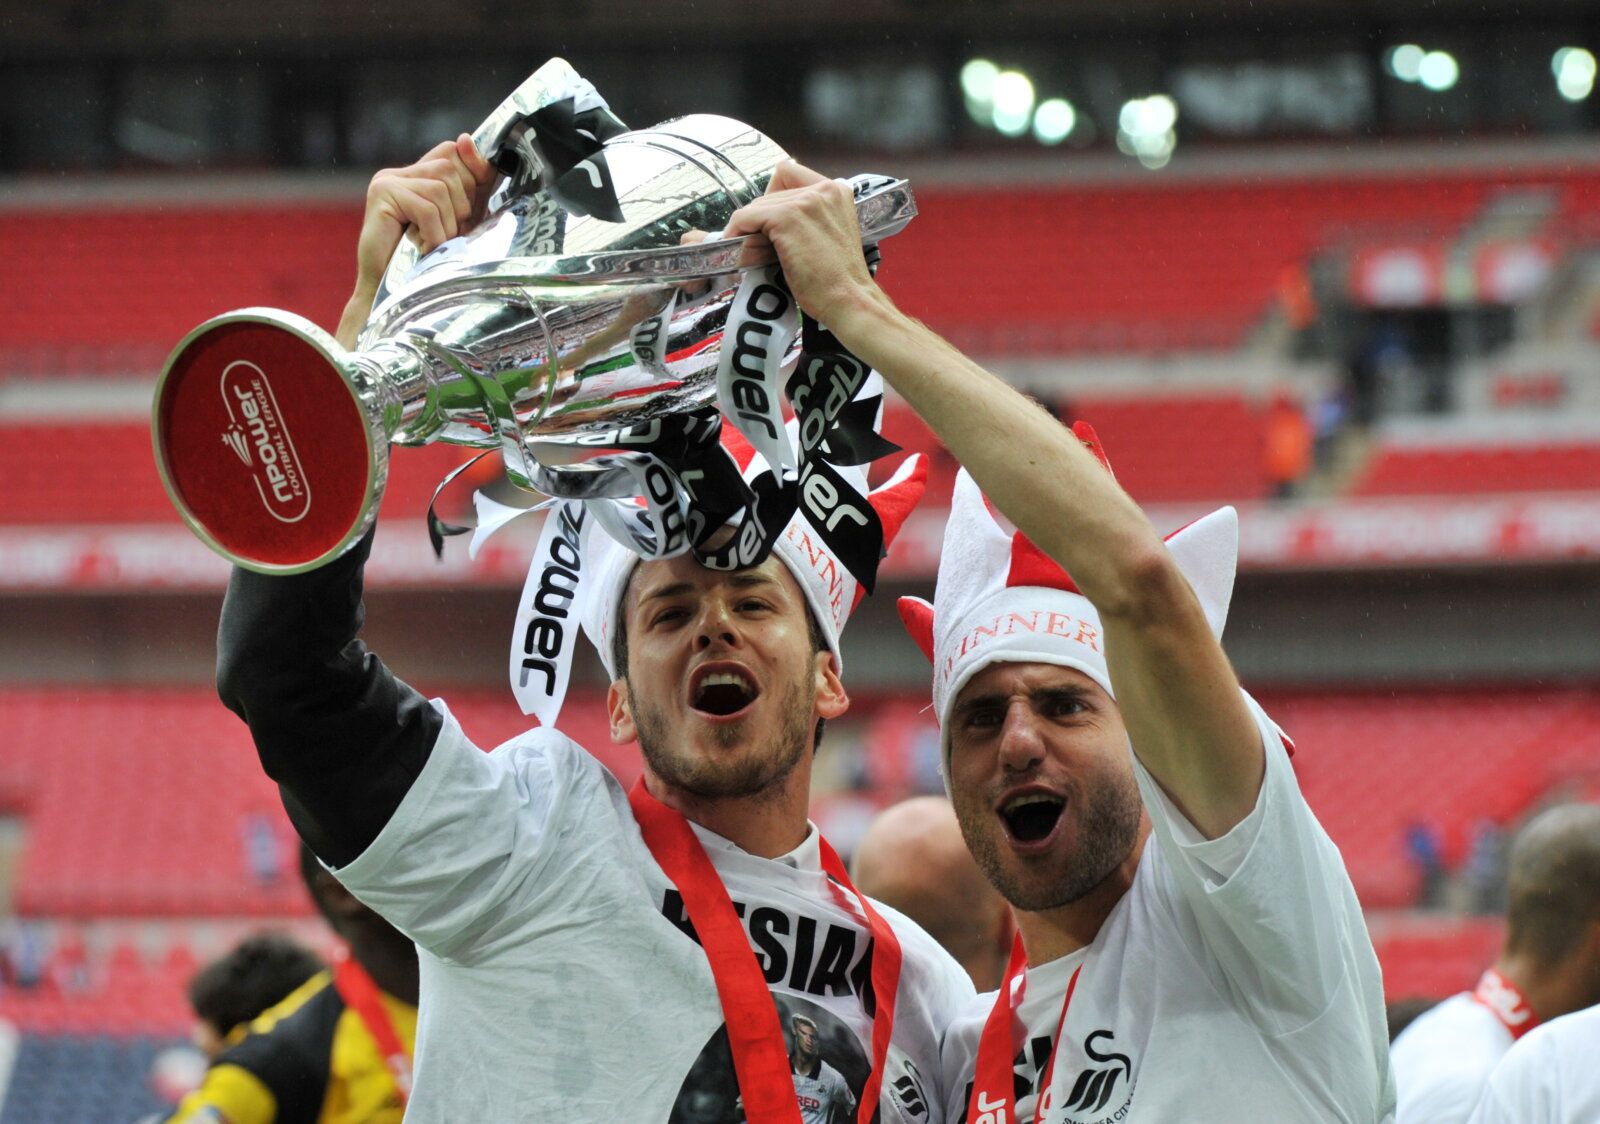 Football - Reading v Swansea City - npower Football League Championship Play-Off Final - Wembley Stadium - 10/11 - 30/5/11 
Swansea City's Andrea Orlandi (L) and Angel Rangel (R) celebrate winning the Championship Play Off Final with the trophy 
Mandatory Credit: Action Images / Adam Holt